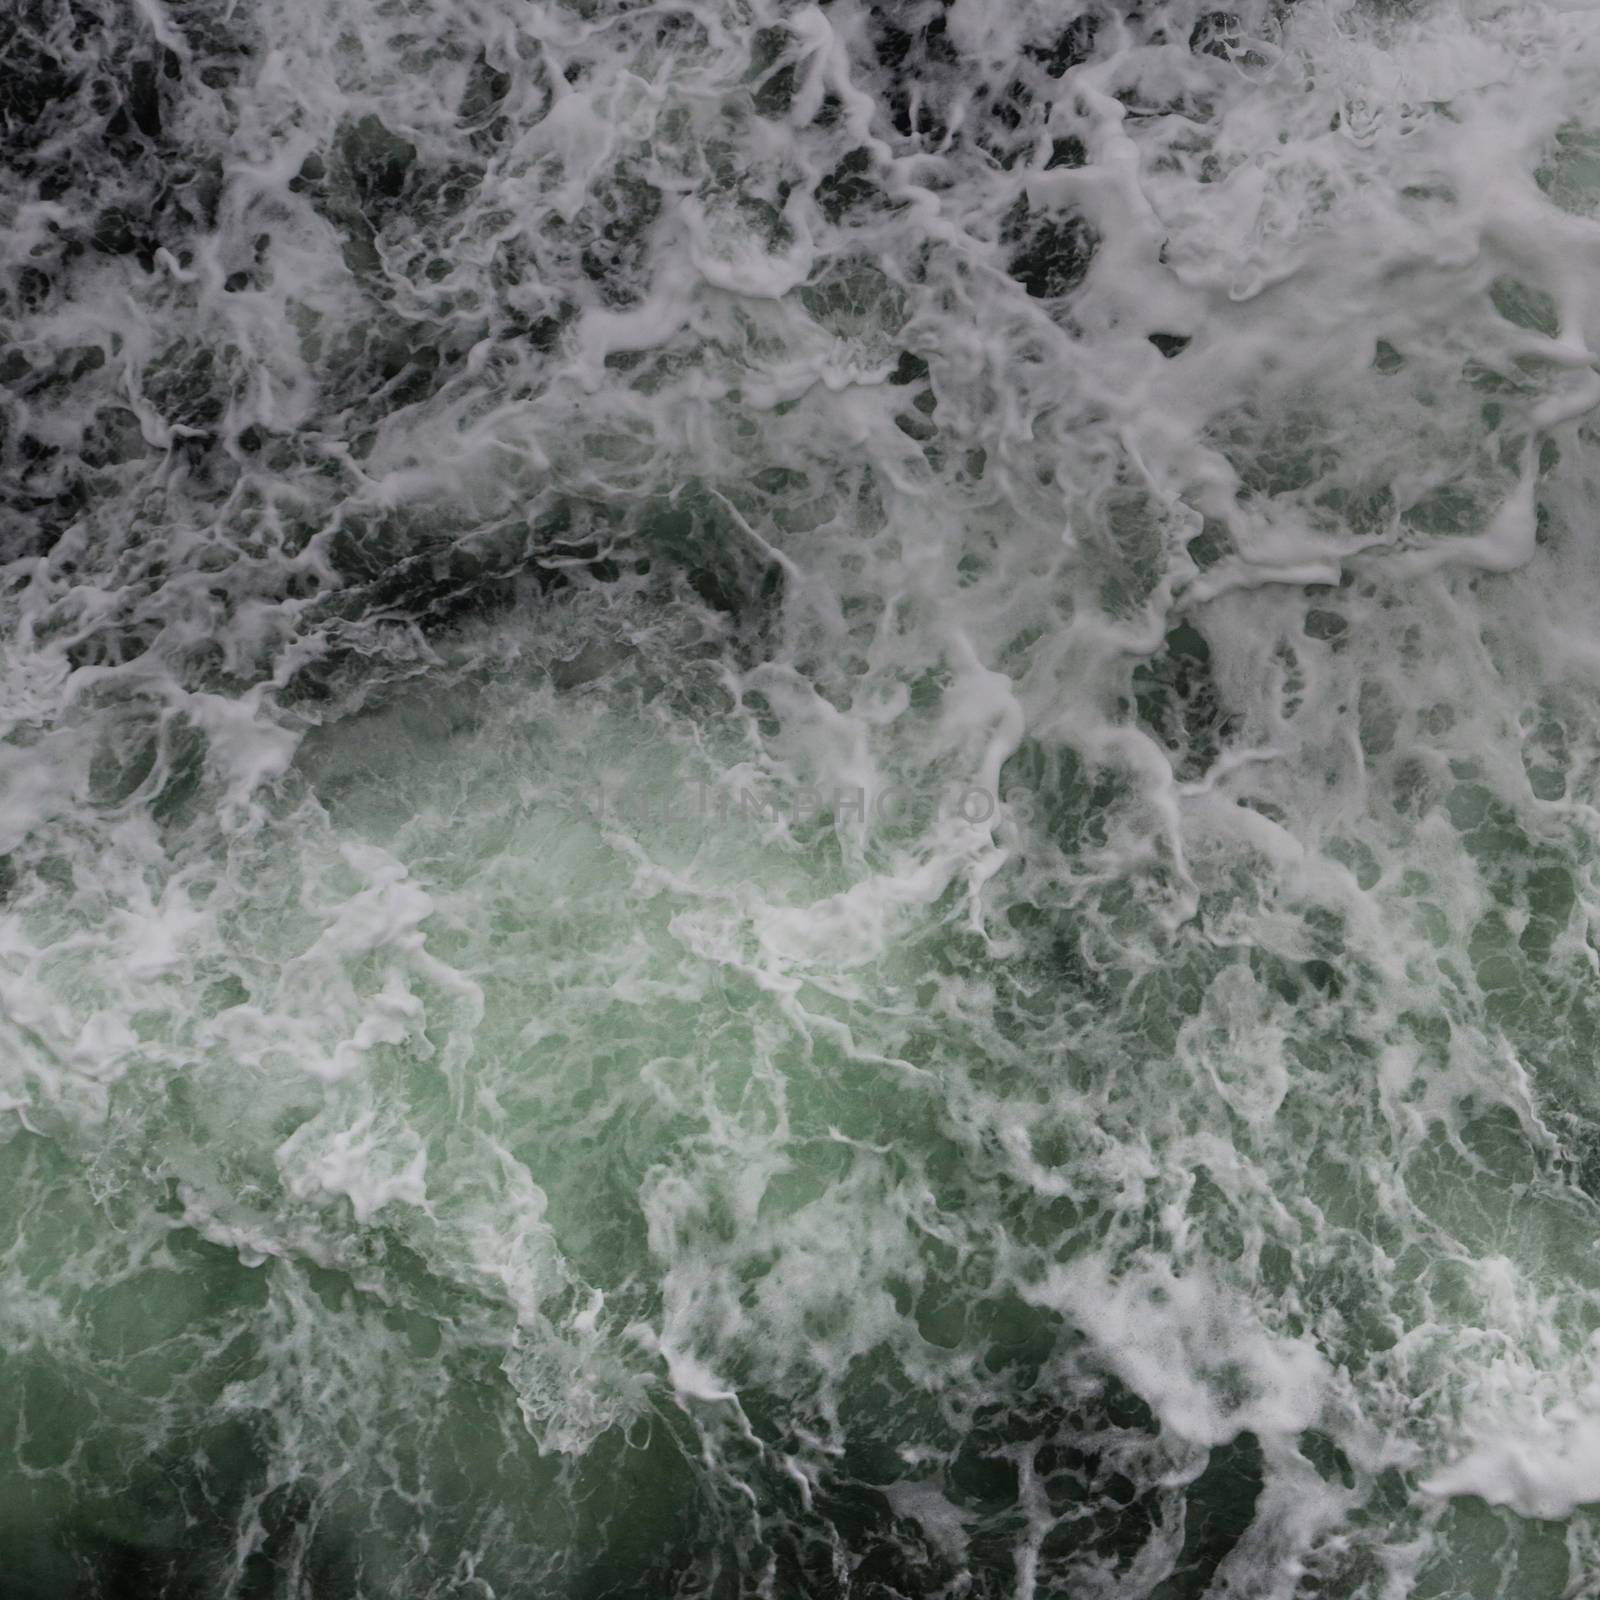 Big water splash seen from above a boat